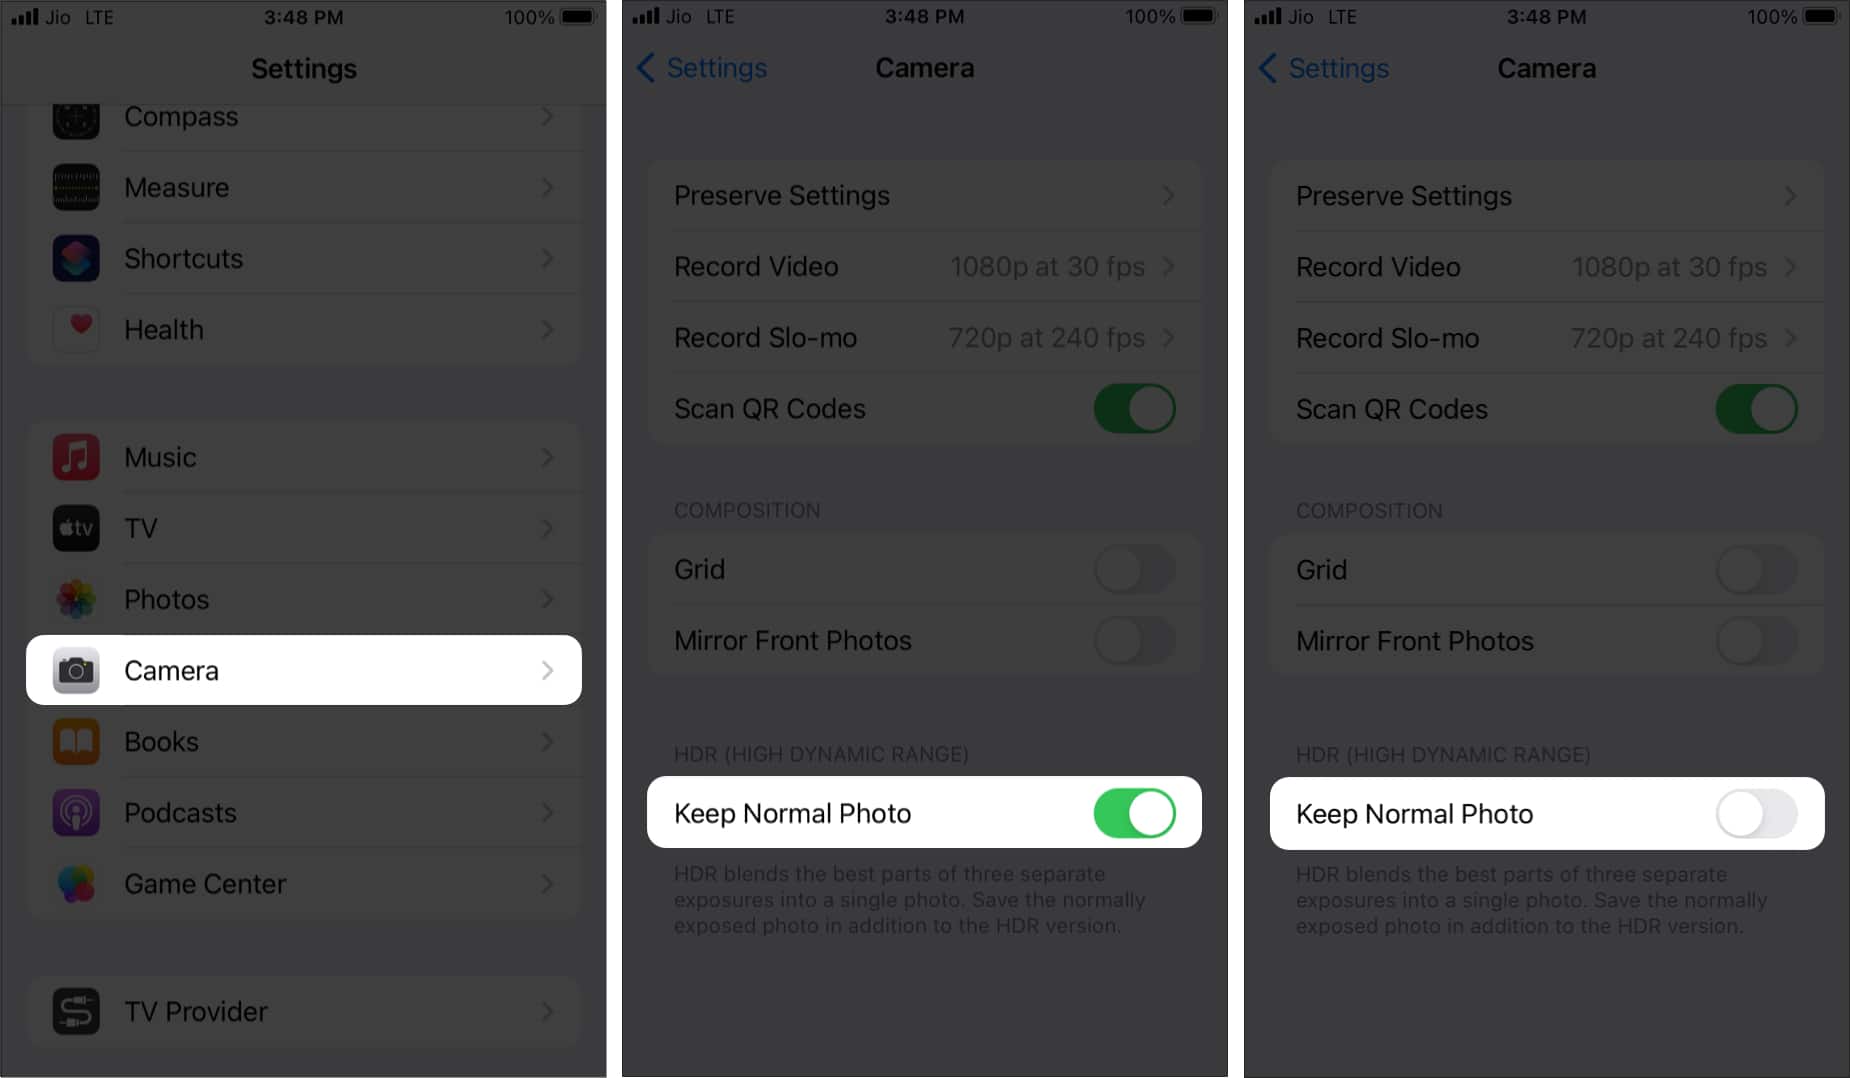 How to stop HDR from saving two images in iPhone Photos app